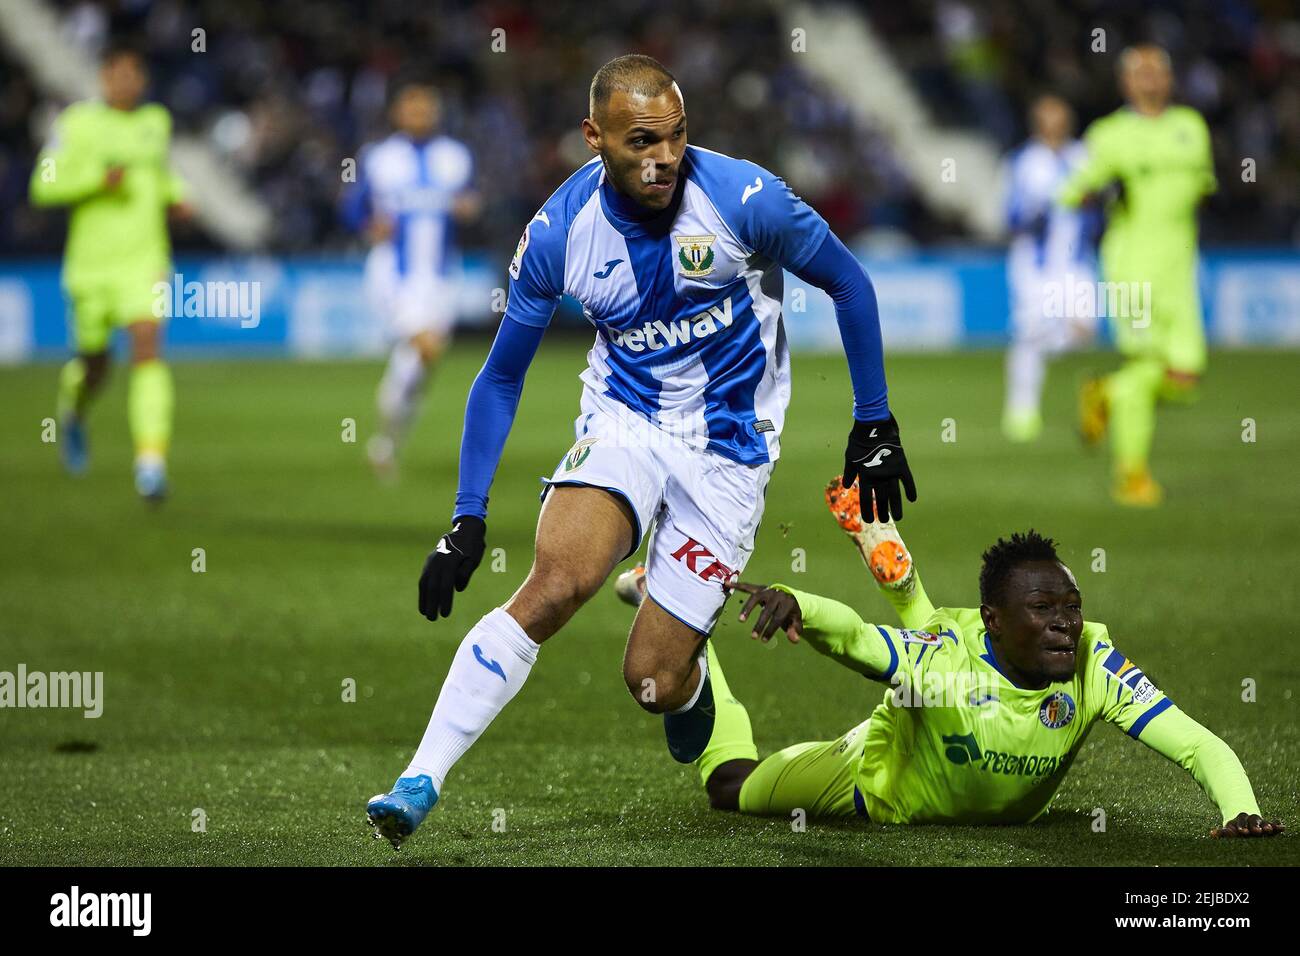 Martin Braithwaite of CD Leganes and Djene Dakoman of Getafe FC are seen in  action during the La Liga match between CD Leganes and Getafe CF at  Butarque Stadium in Leganes. (Final